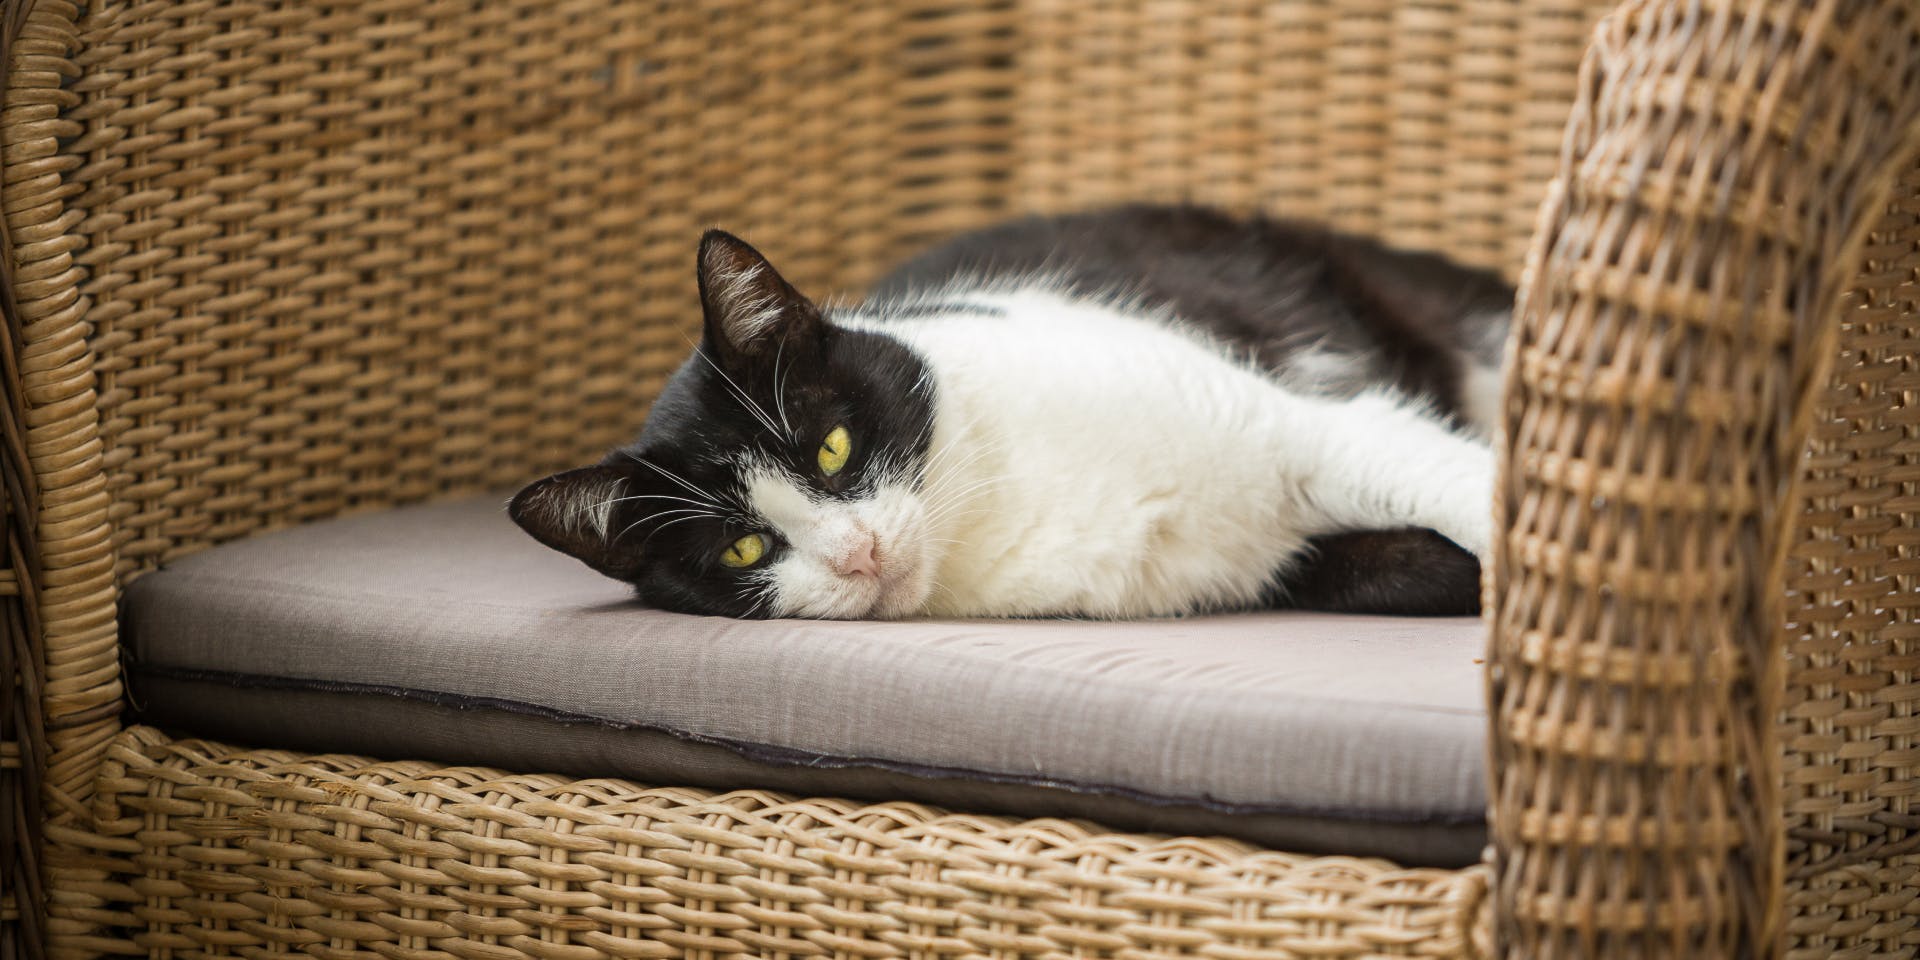 A black and white cat sitting on a garden chair.